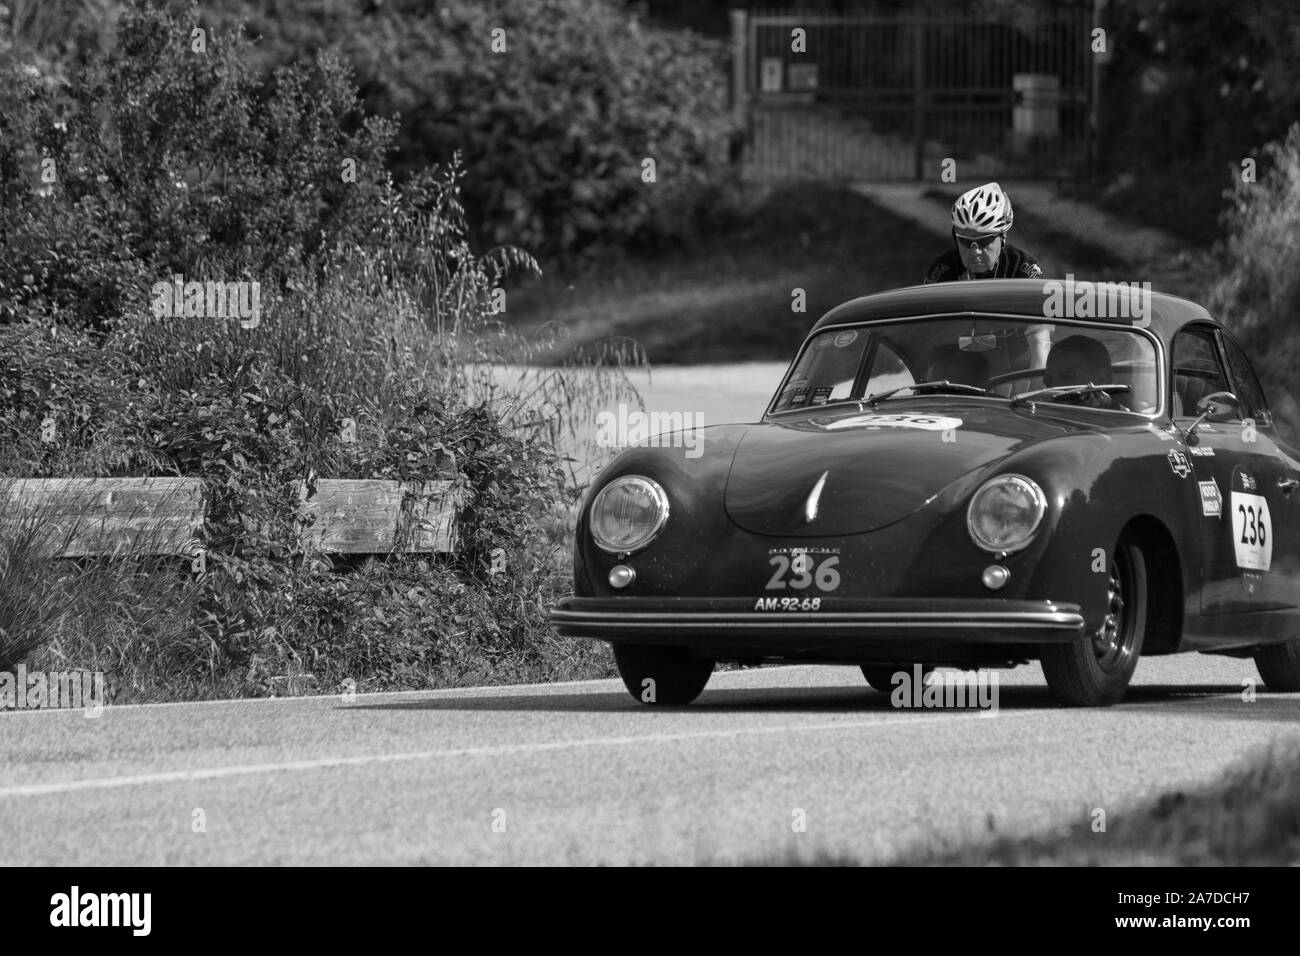 PESARO COLLE SAN BARTOLO , ITALY - MAY 17 - 2018 : PORSCHE 356 1500 SUPER 1953 on an old racing car in rally Mille Miglia 2018 the famous italian hist Stock Photo